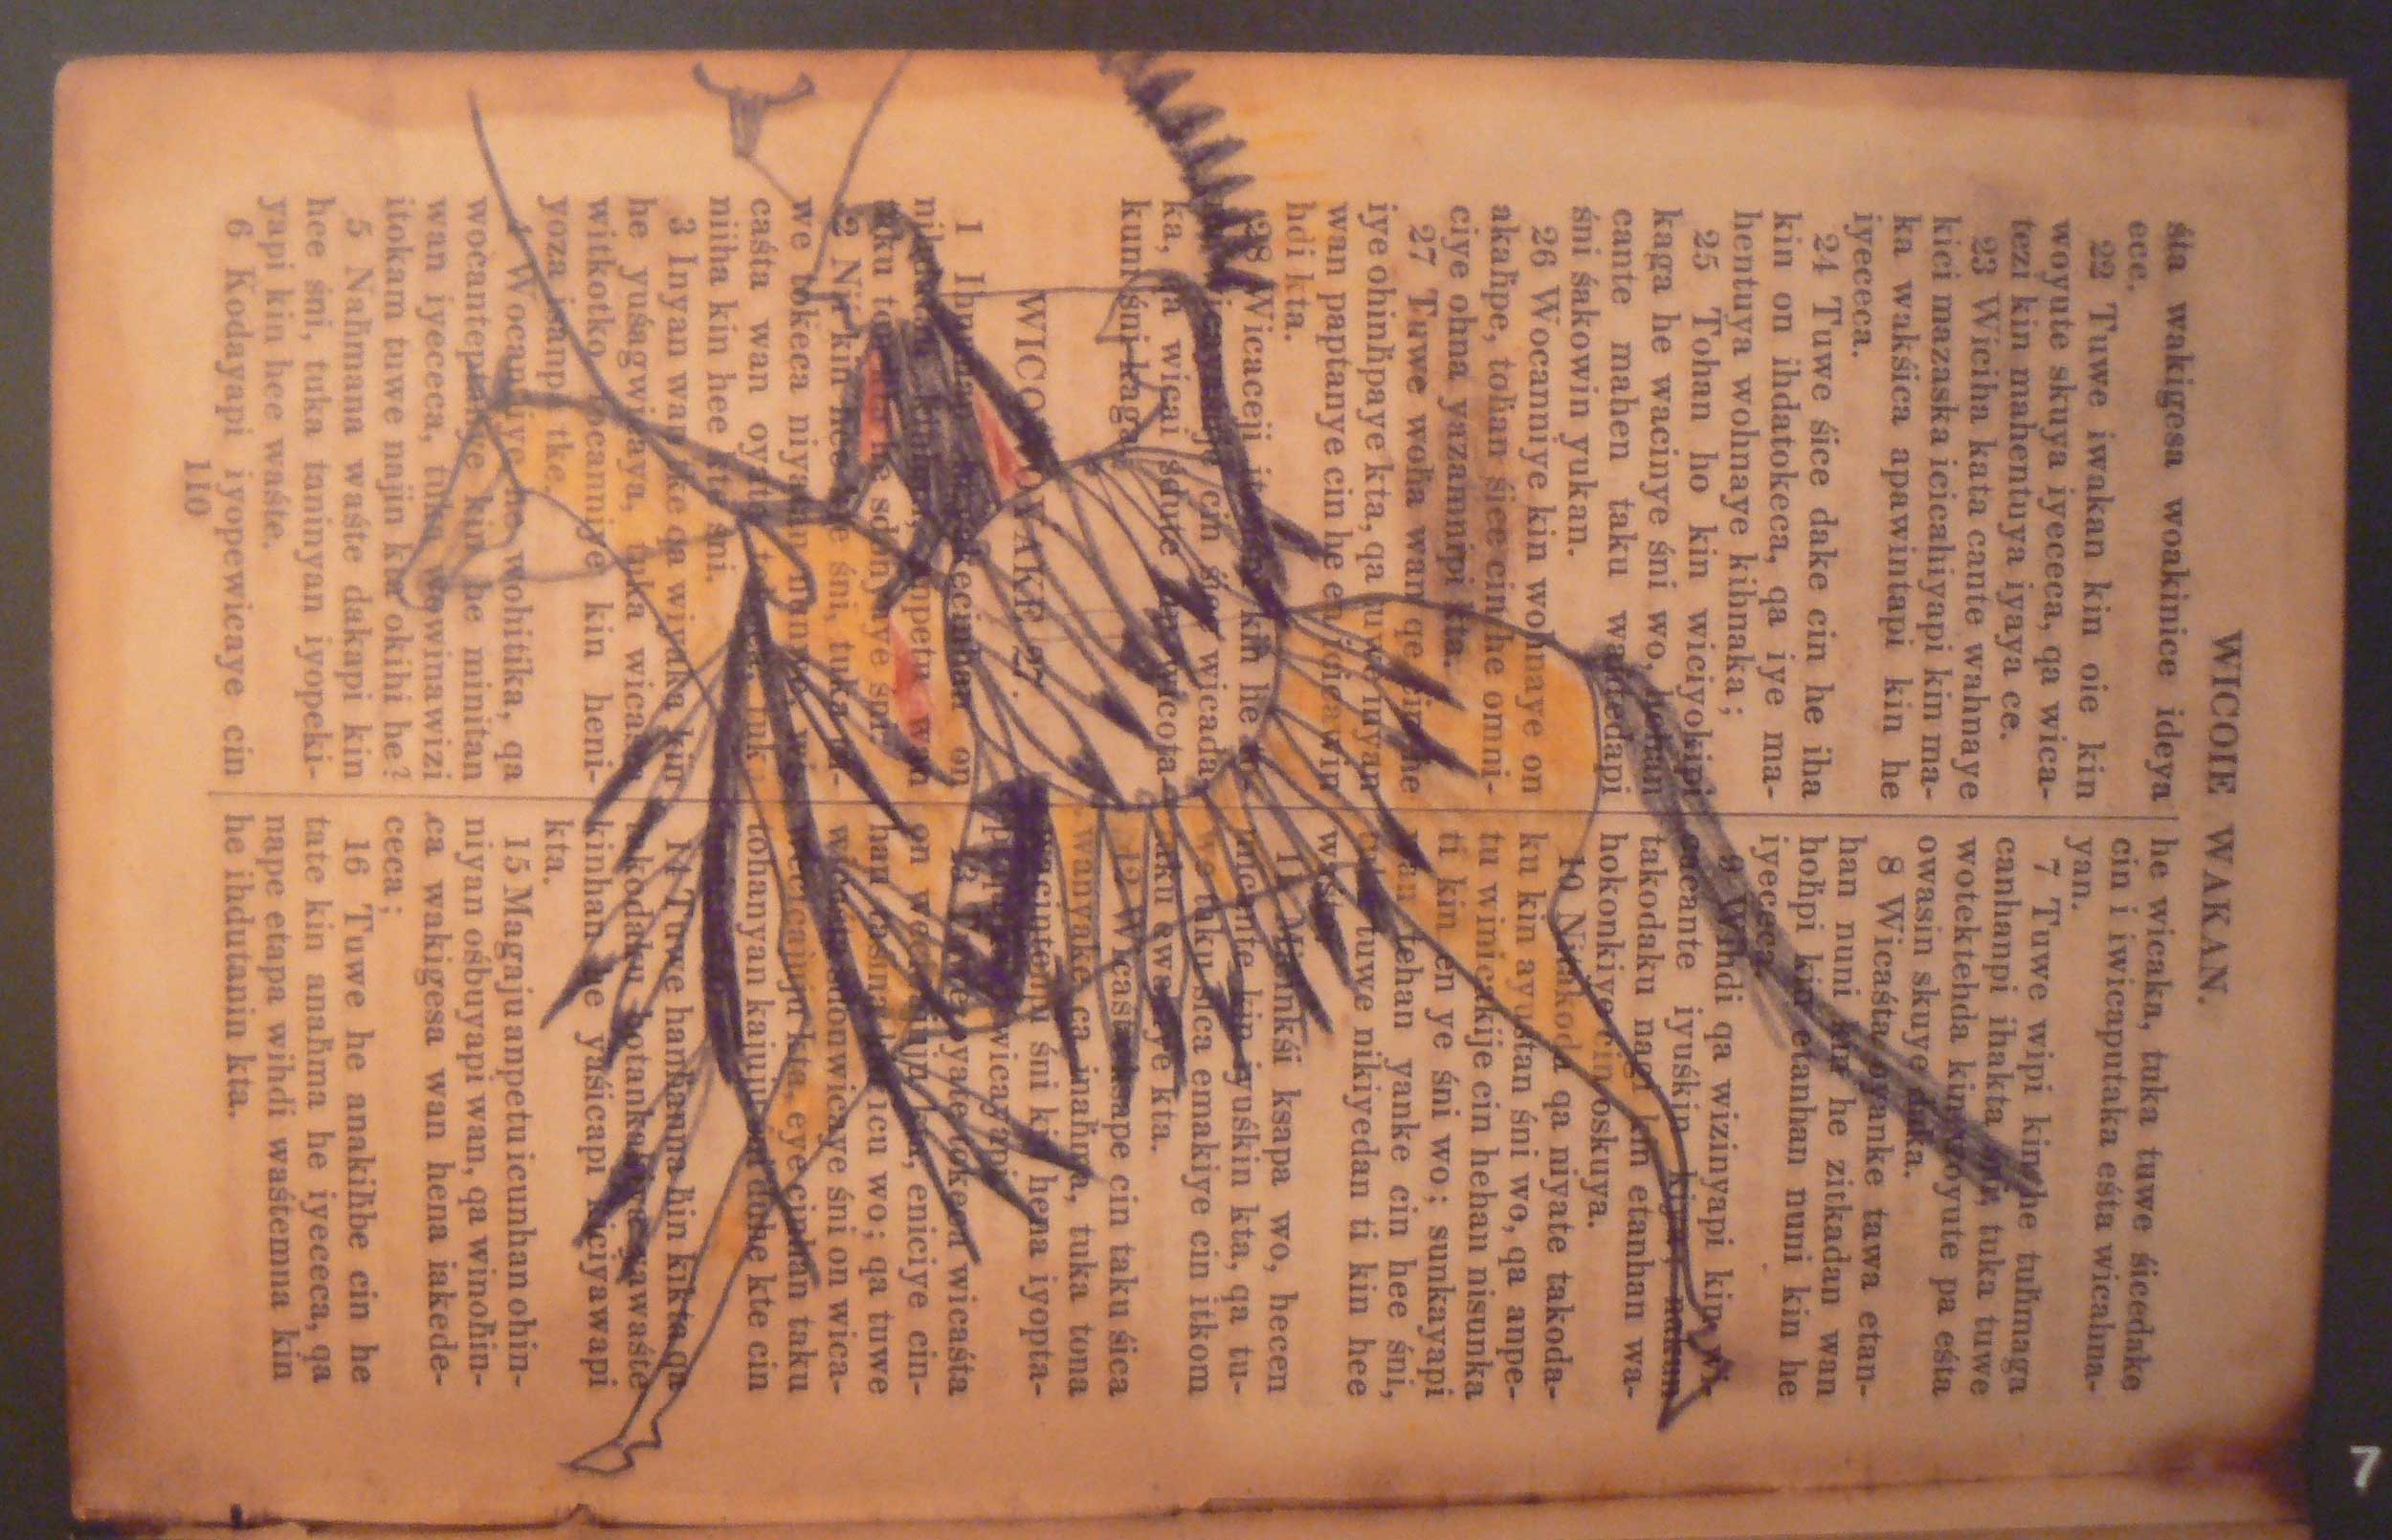 Bible translated into Dakota with drawing of Native American over text